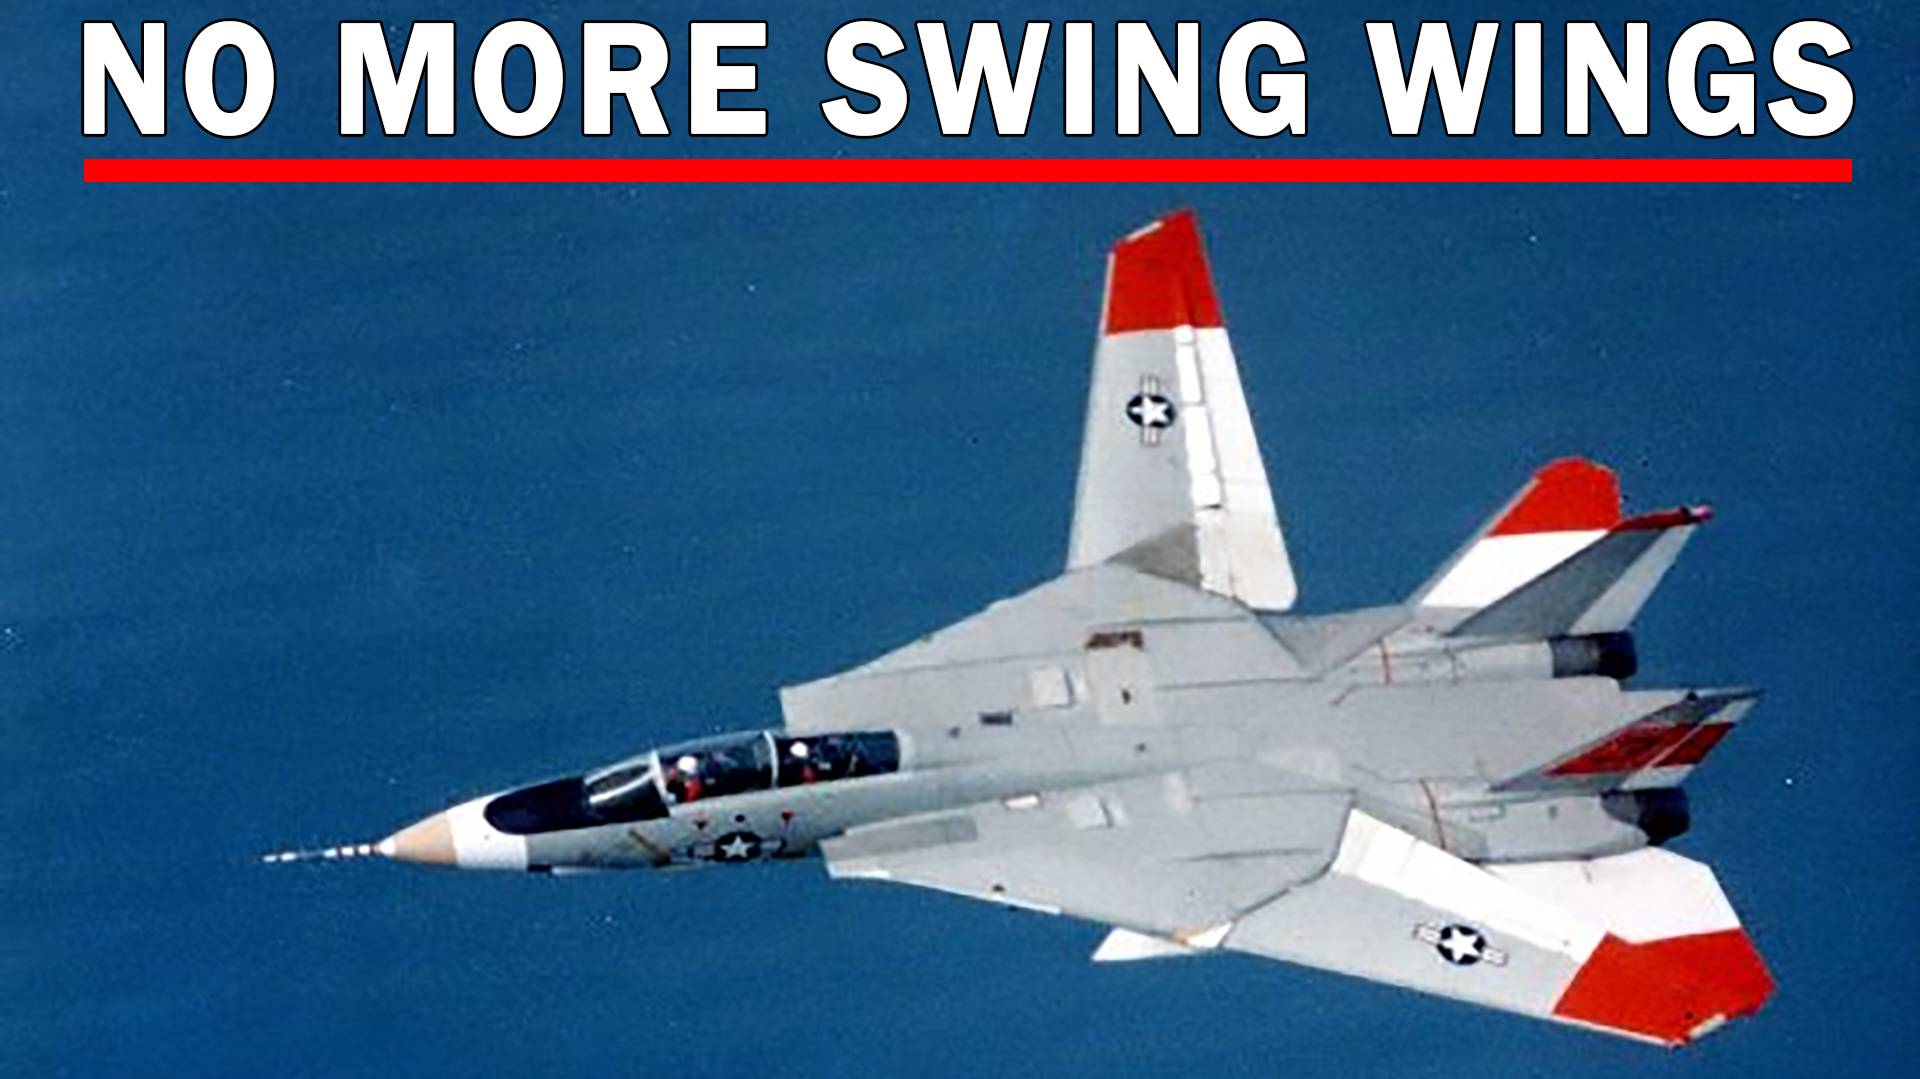 Why Aren't Swing Wing Aircraft Made Any More